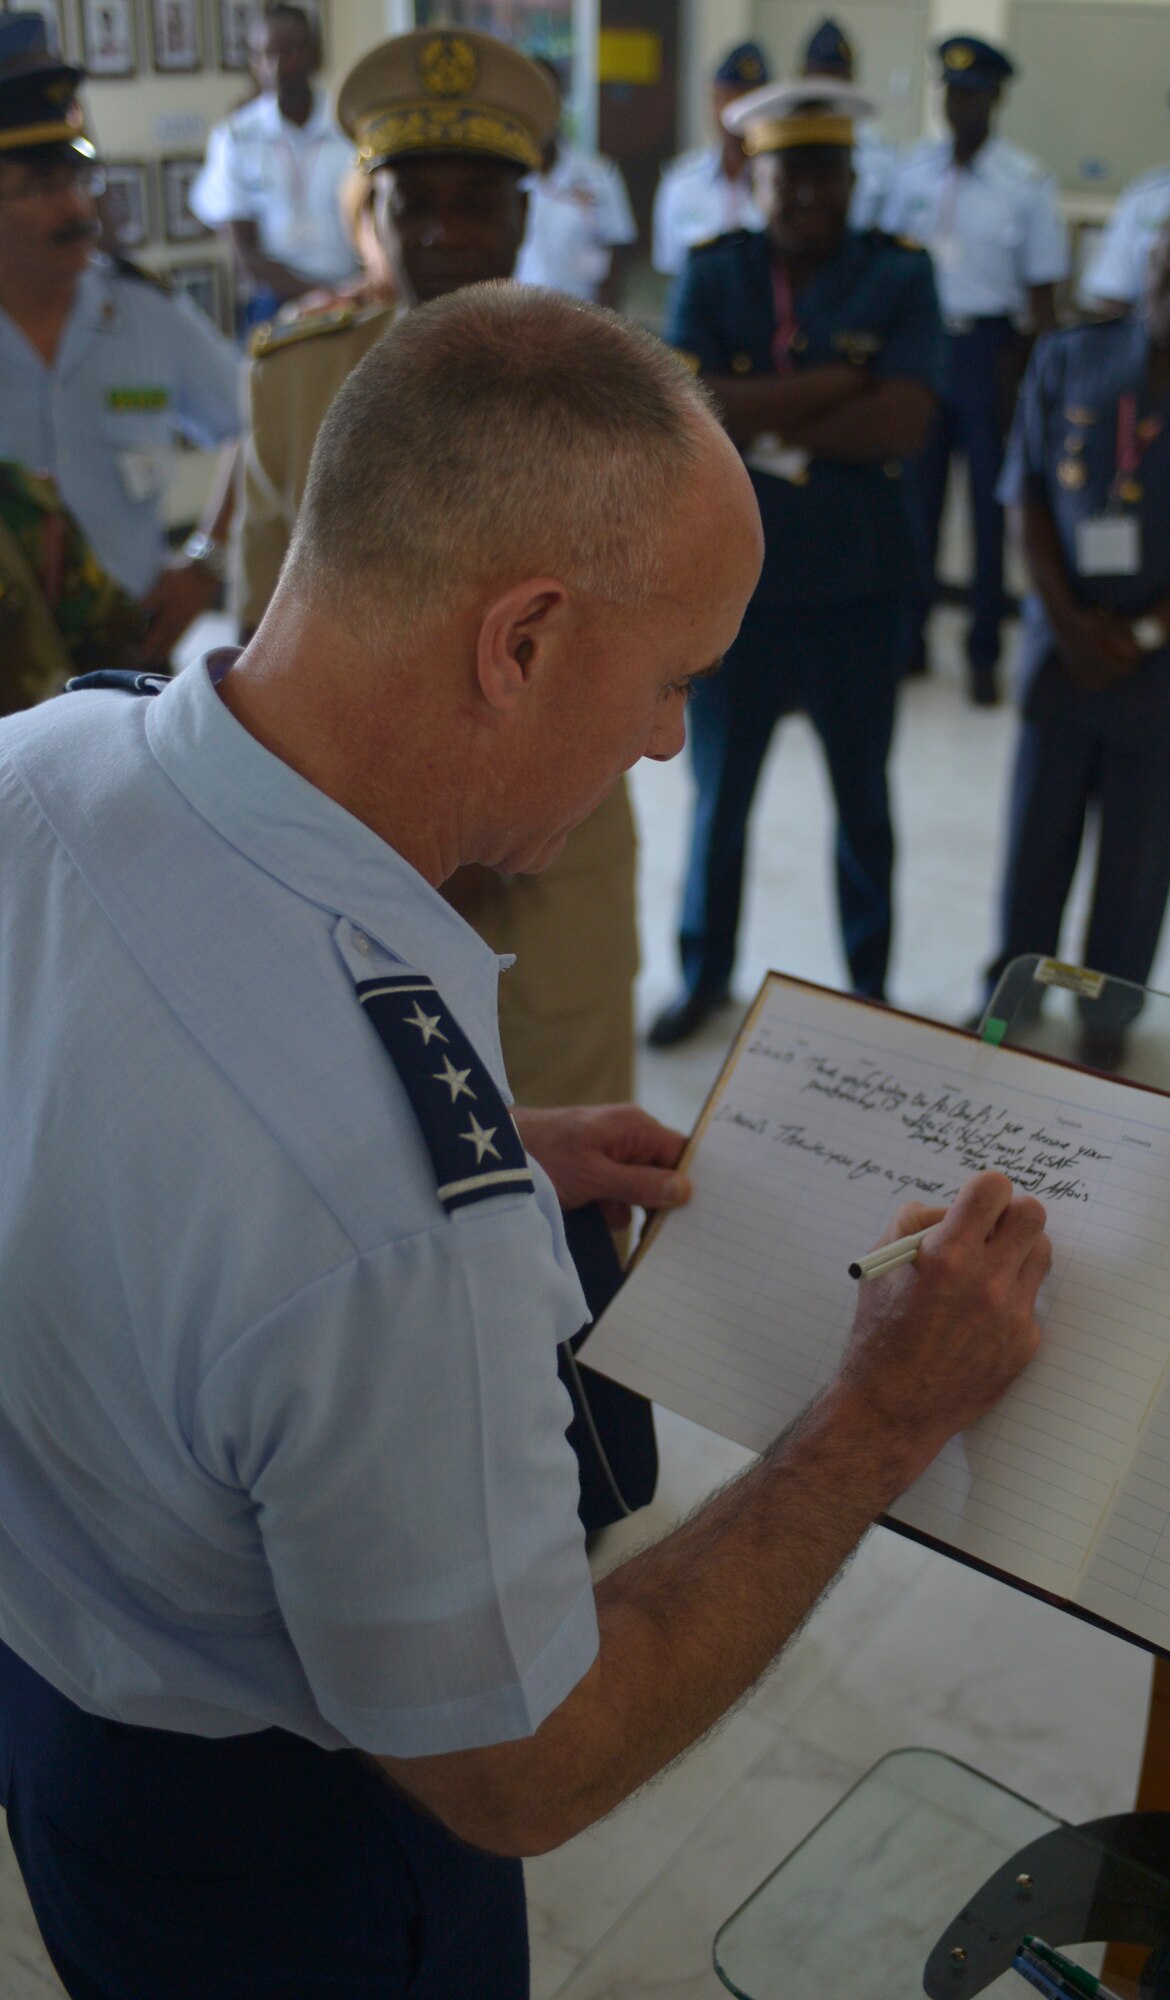 Lt. Gen. Craig A. Franklin, 3rd Air Force commander, signs a guestbook containing remarks and wishes from international heads of state, government officials and senior ranking military officers who visited Accra, Ghana, Aug. 21, 2013. Ten African air chiefs joined Franklin in recording their hopes for a safe, secure Africa at the Regional African Air Chiefs Symposium. (U.S. Air Force photo by Airman 1st Class Jordan Castelan/Released)